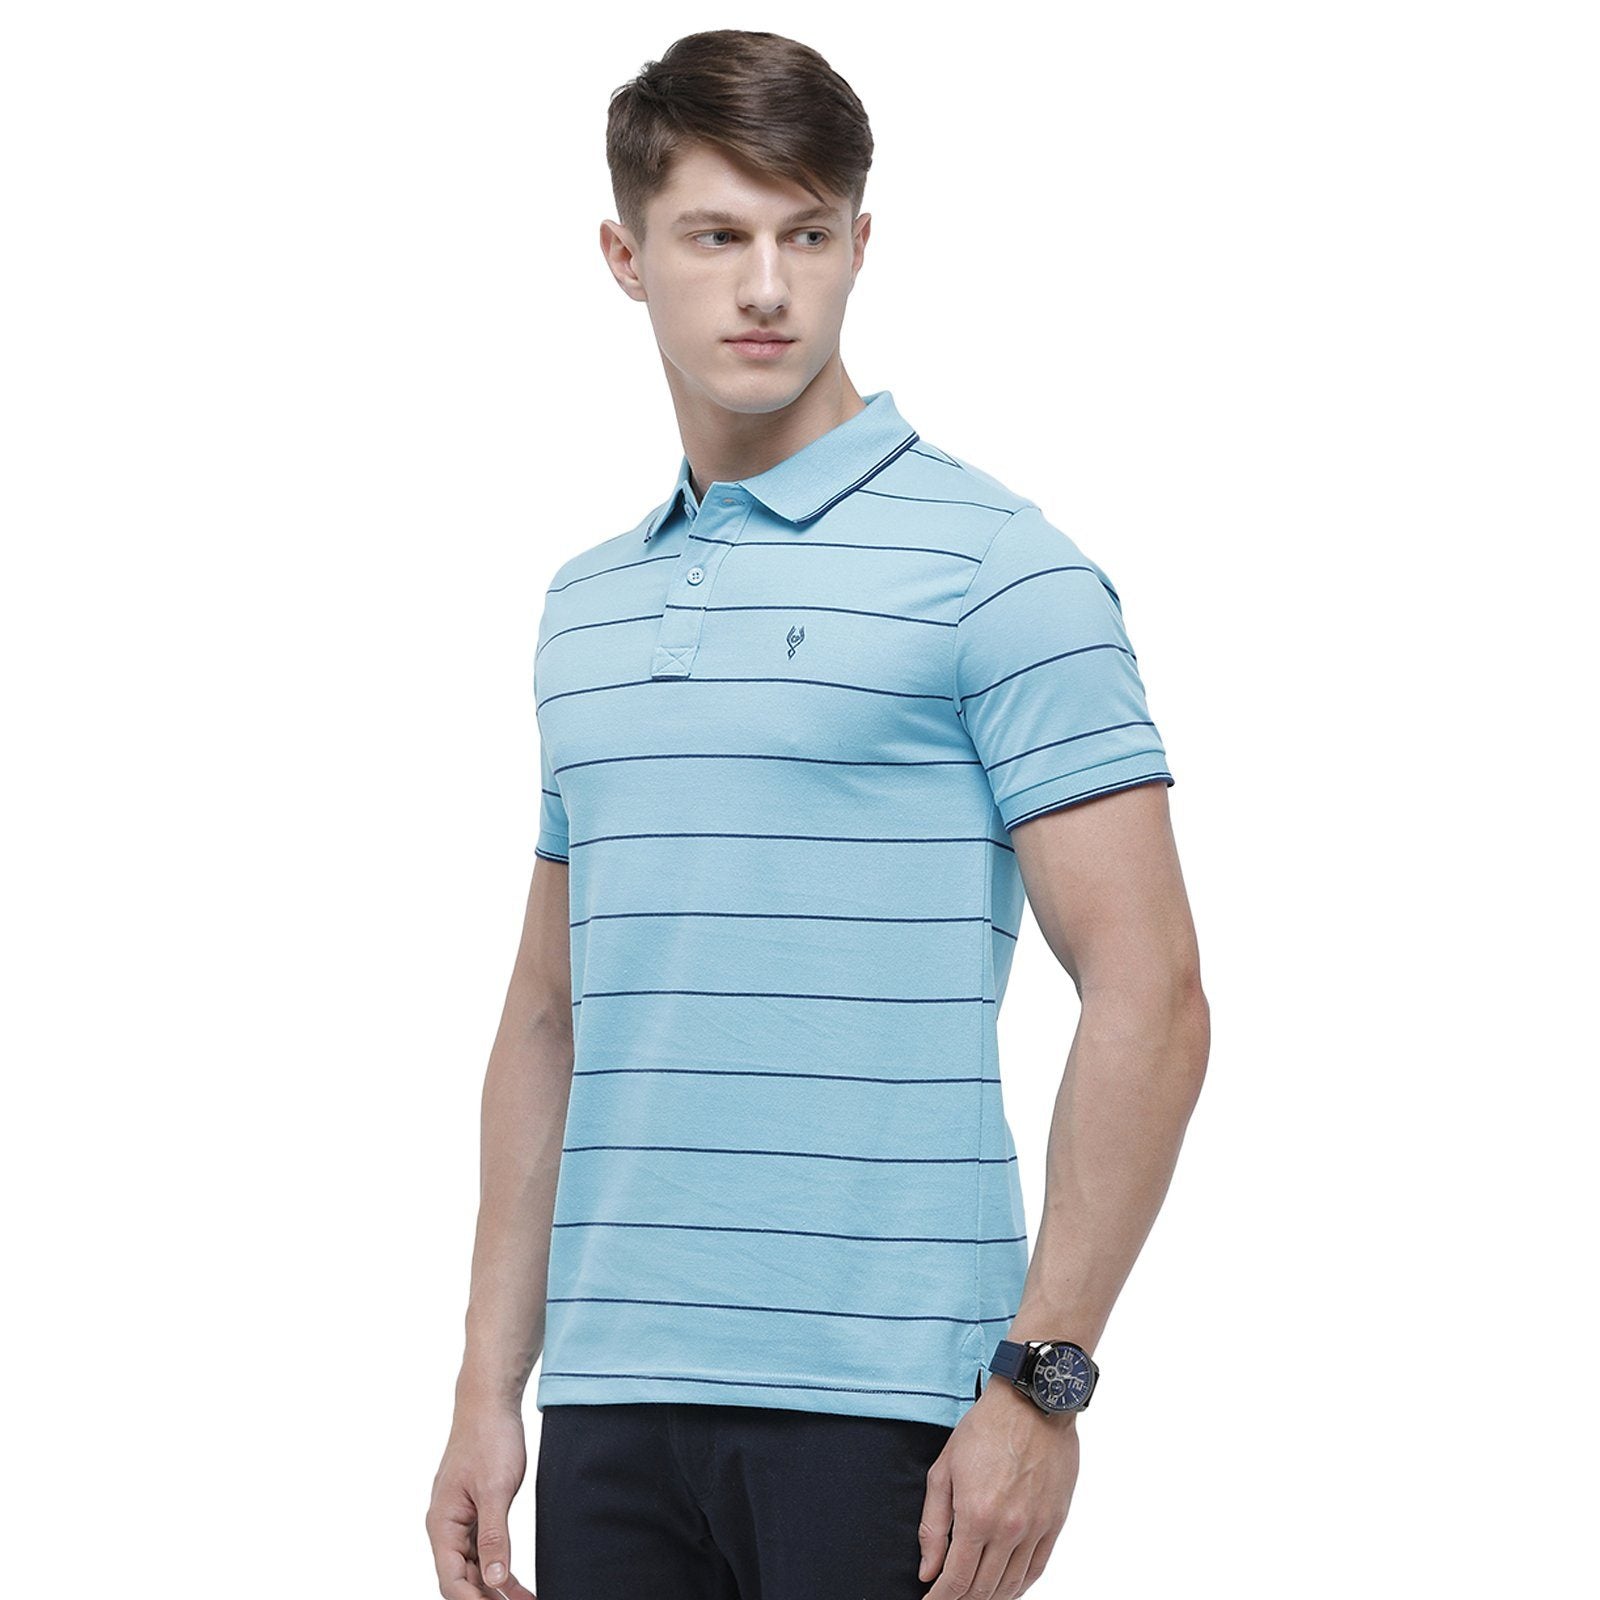 Classic polo Men's Polo Neck Half Sleeve Turquoise Cotton Slim Fit T-Shirt CPEG - 251 A SF P T-shirt Classic Polo 